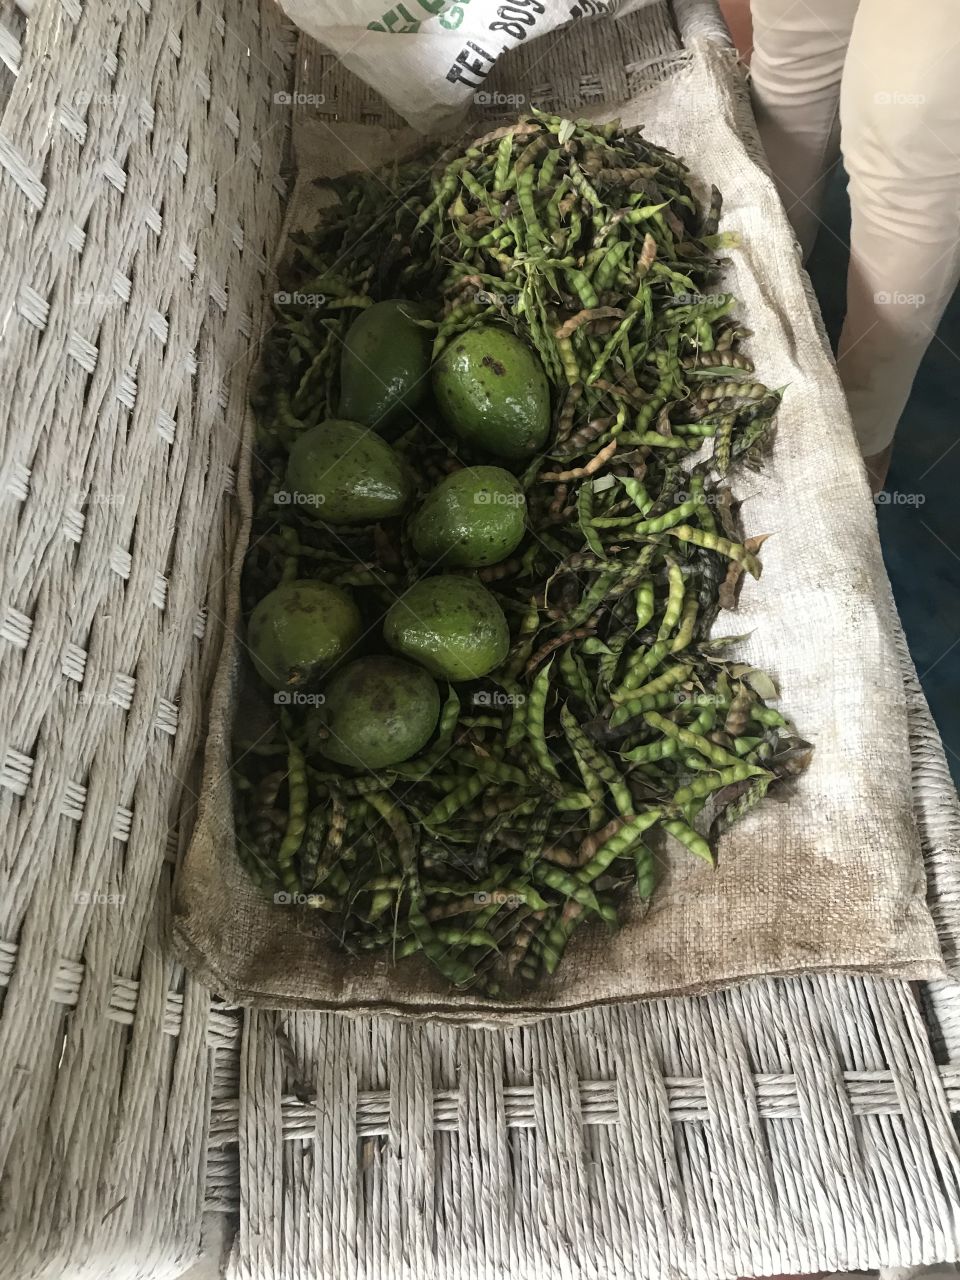 Avocados just picked 